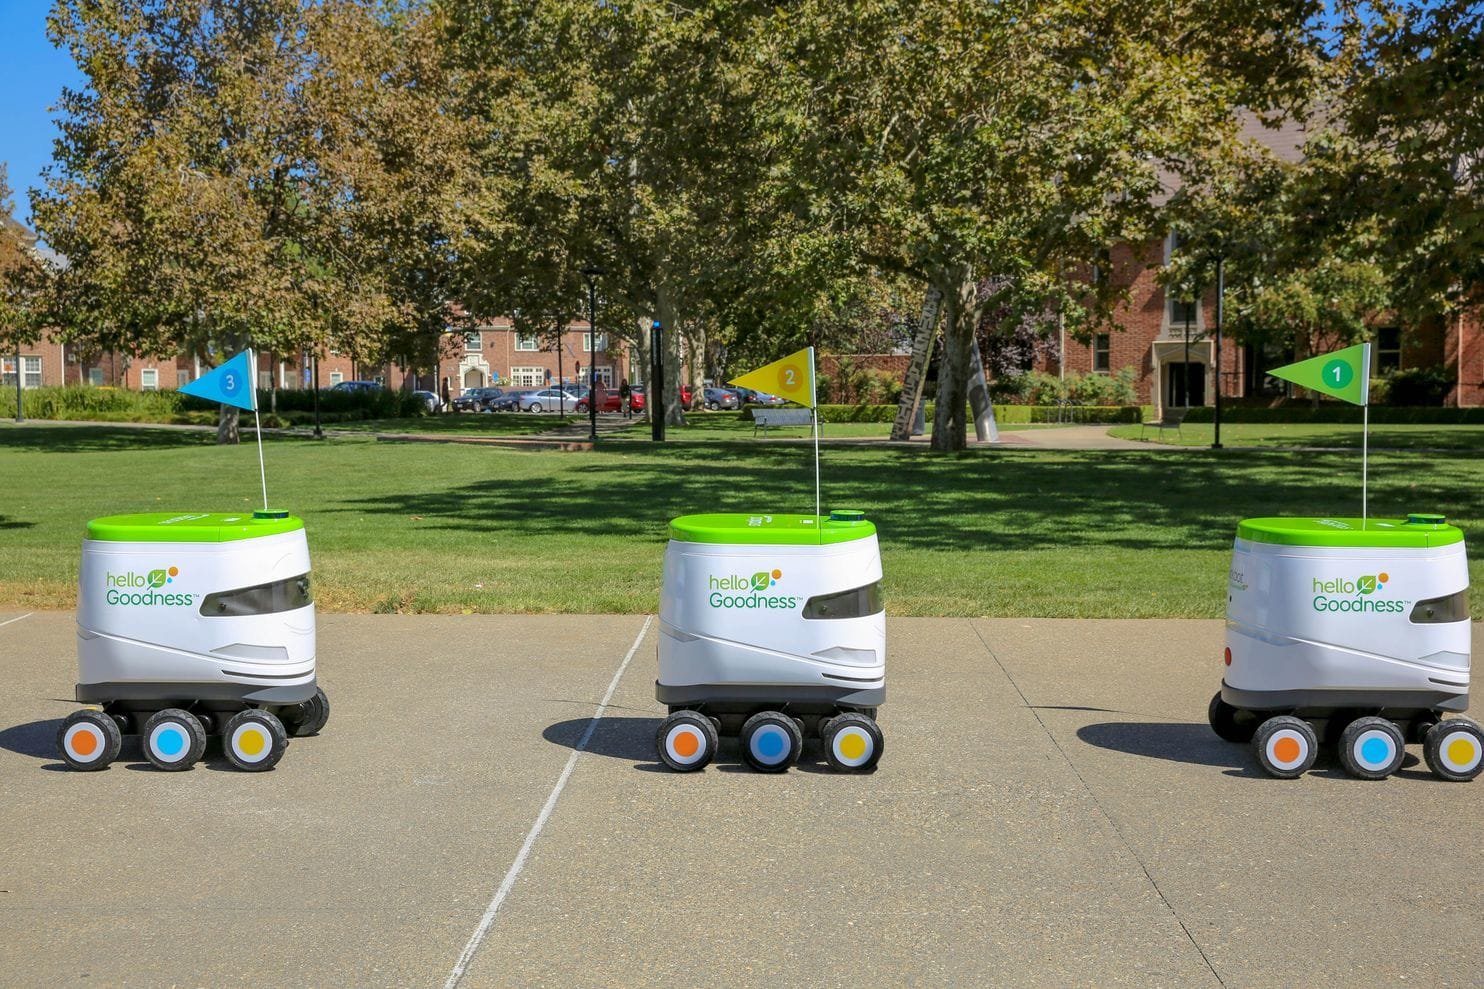 pepsico-launches-self-driving-snackbot-to-college